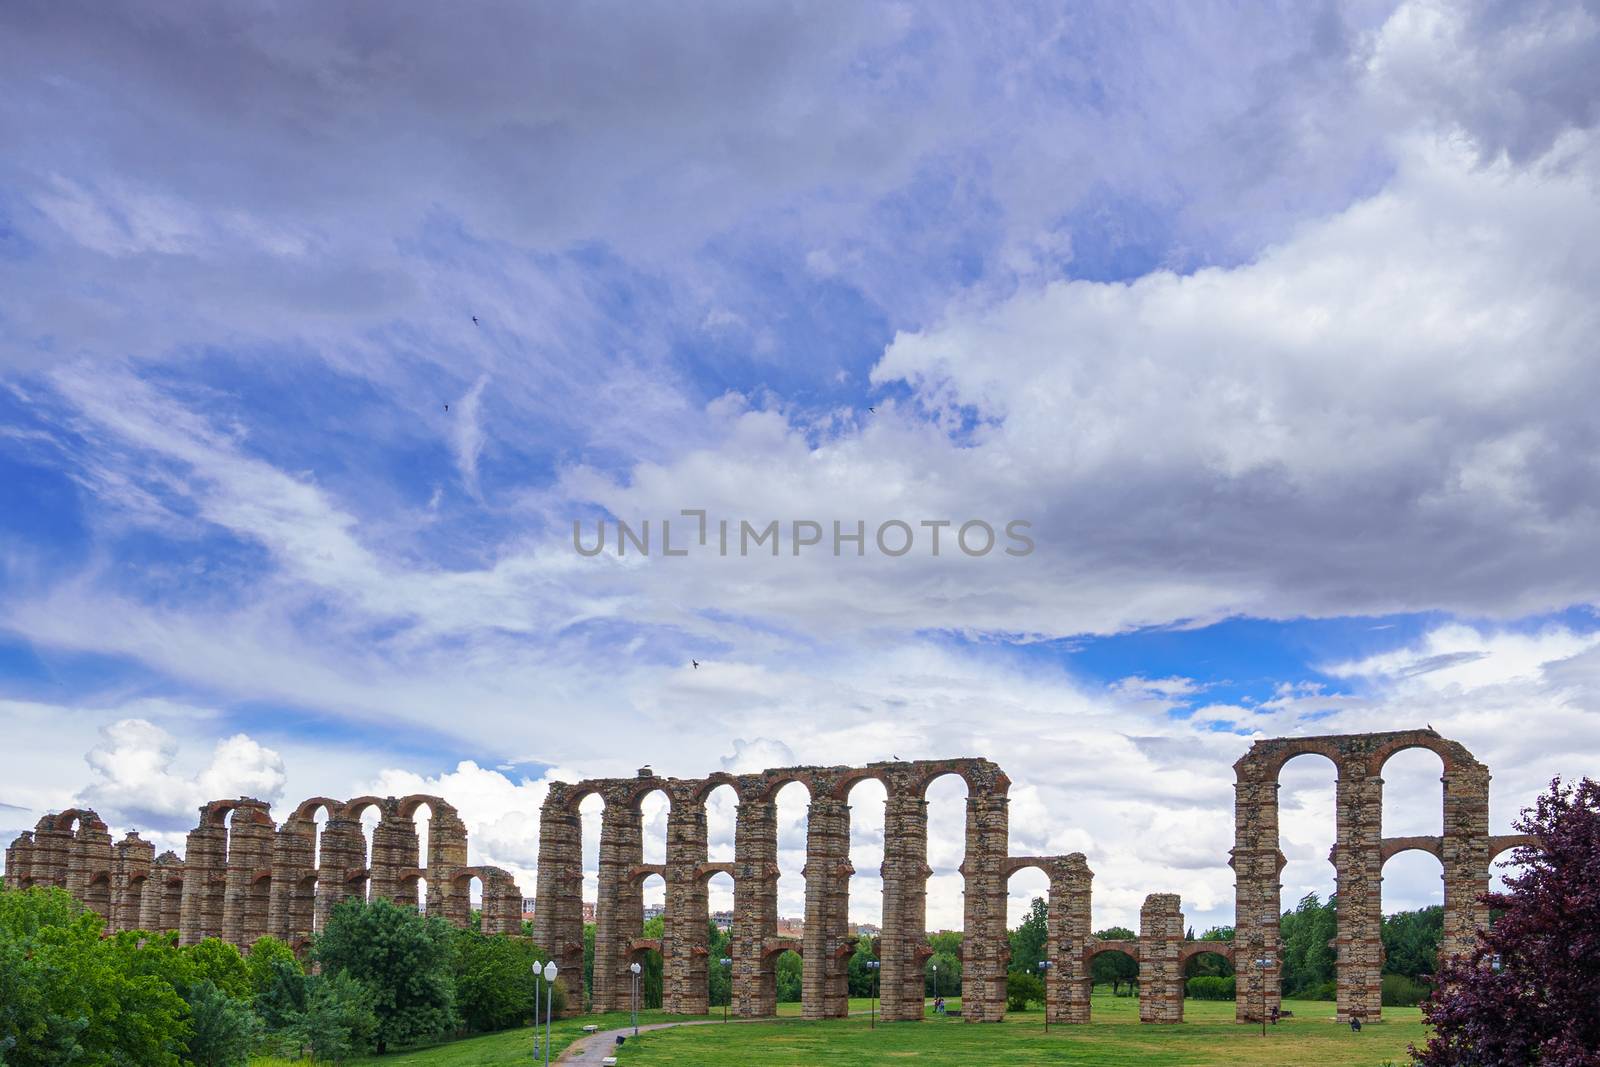 The famous roman aqueduct of the Miracles, Los Milagros, in Merida, province of Badajoz, Extremadura, Spain.The Archaeological Ensemble of Merida is declared a UNESCO World Heritage Site Ref 664